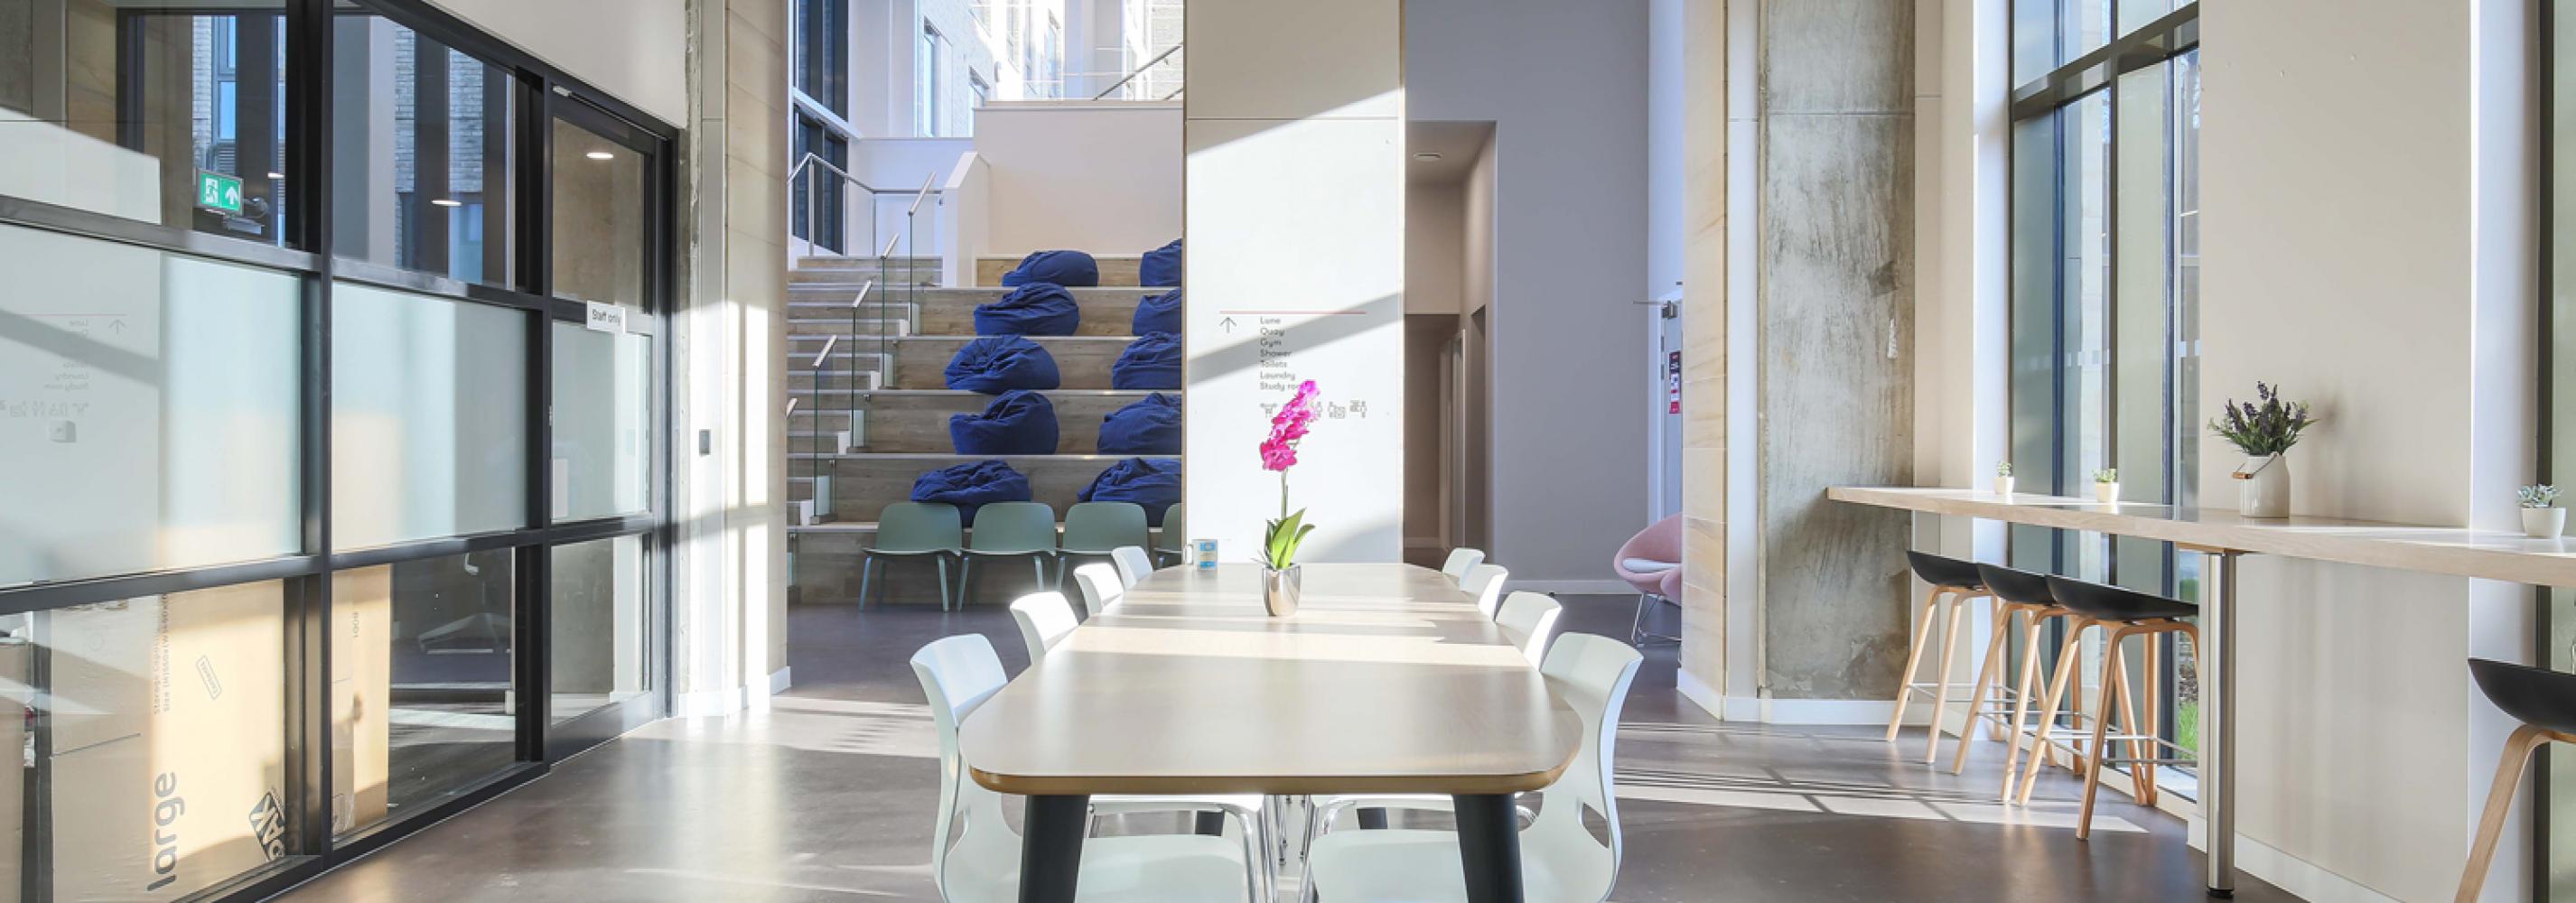 Reception area, long table in the middle, eight white chairs, stairs, ten blue bean bags on the stairs, pink chairs, four black bar stools